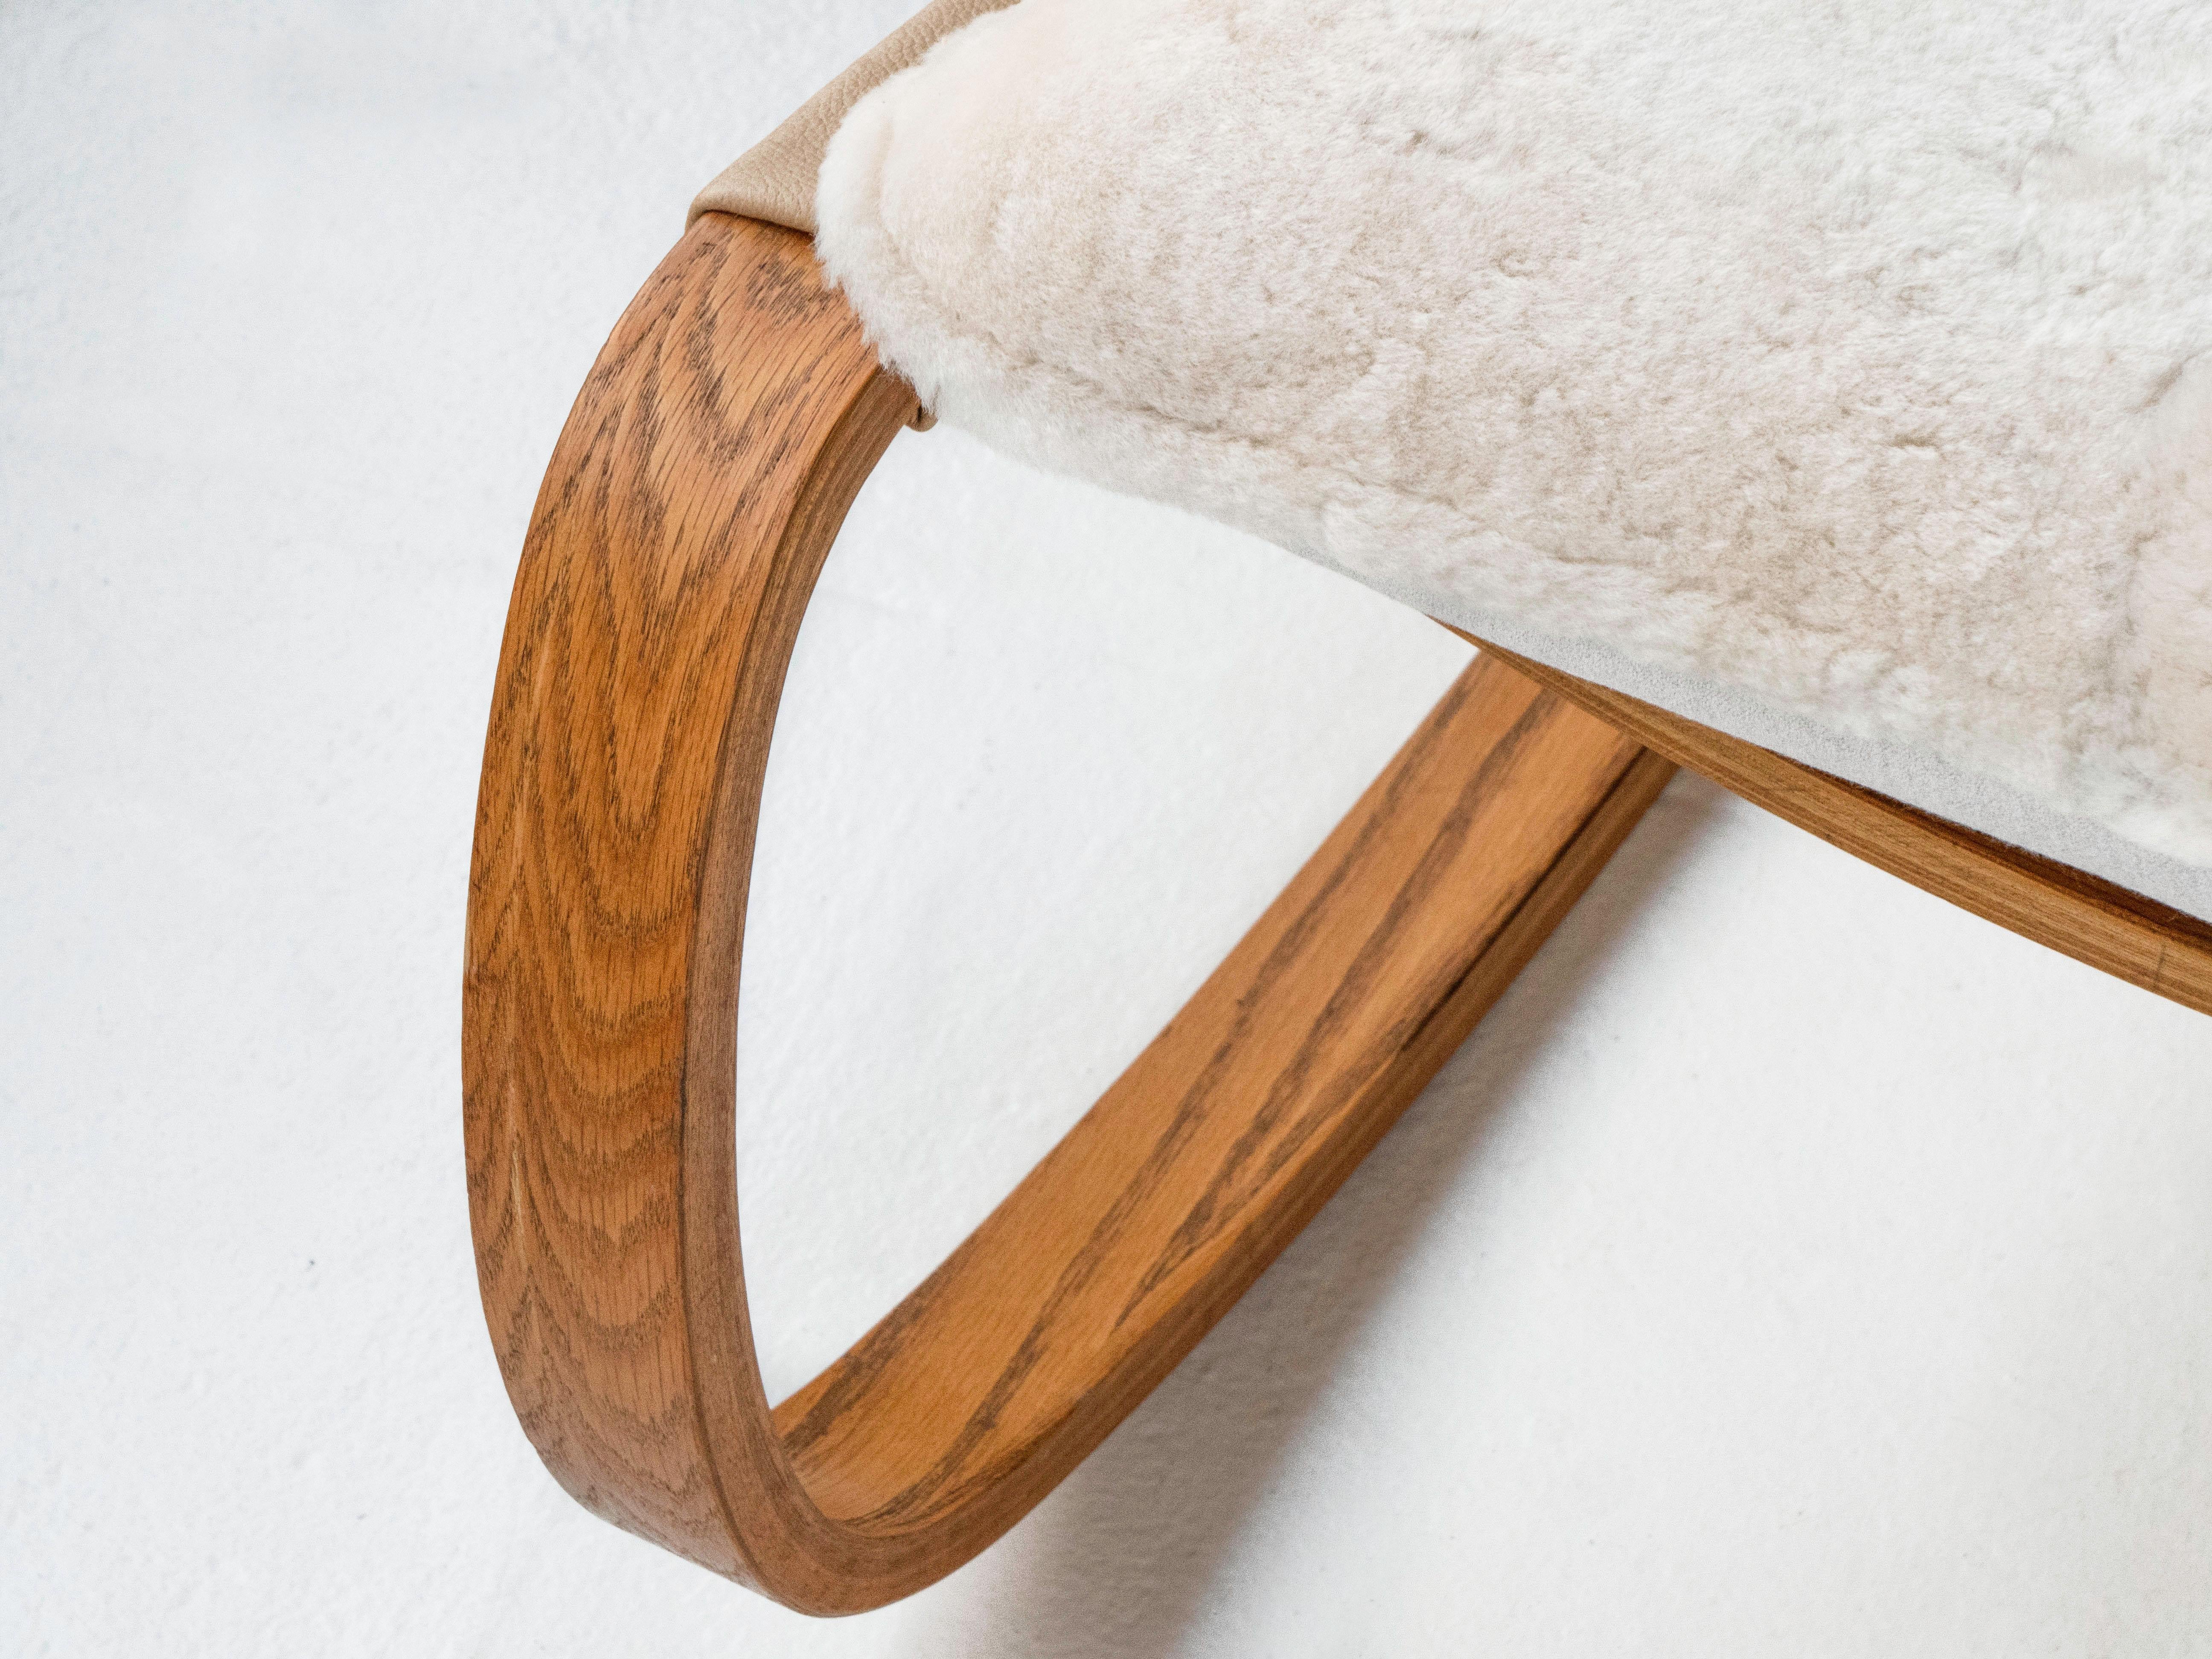 Sheepskin Oak Bentwood Sling Rocking Chair in Shearling by Plycraft, Circa 1970's For Sale